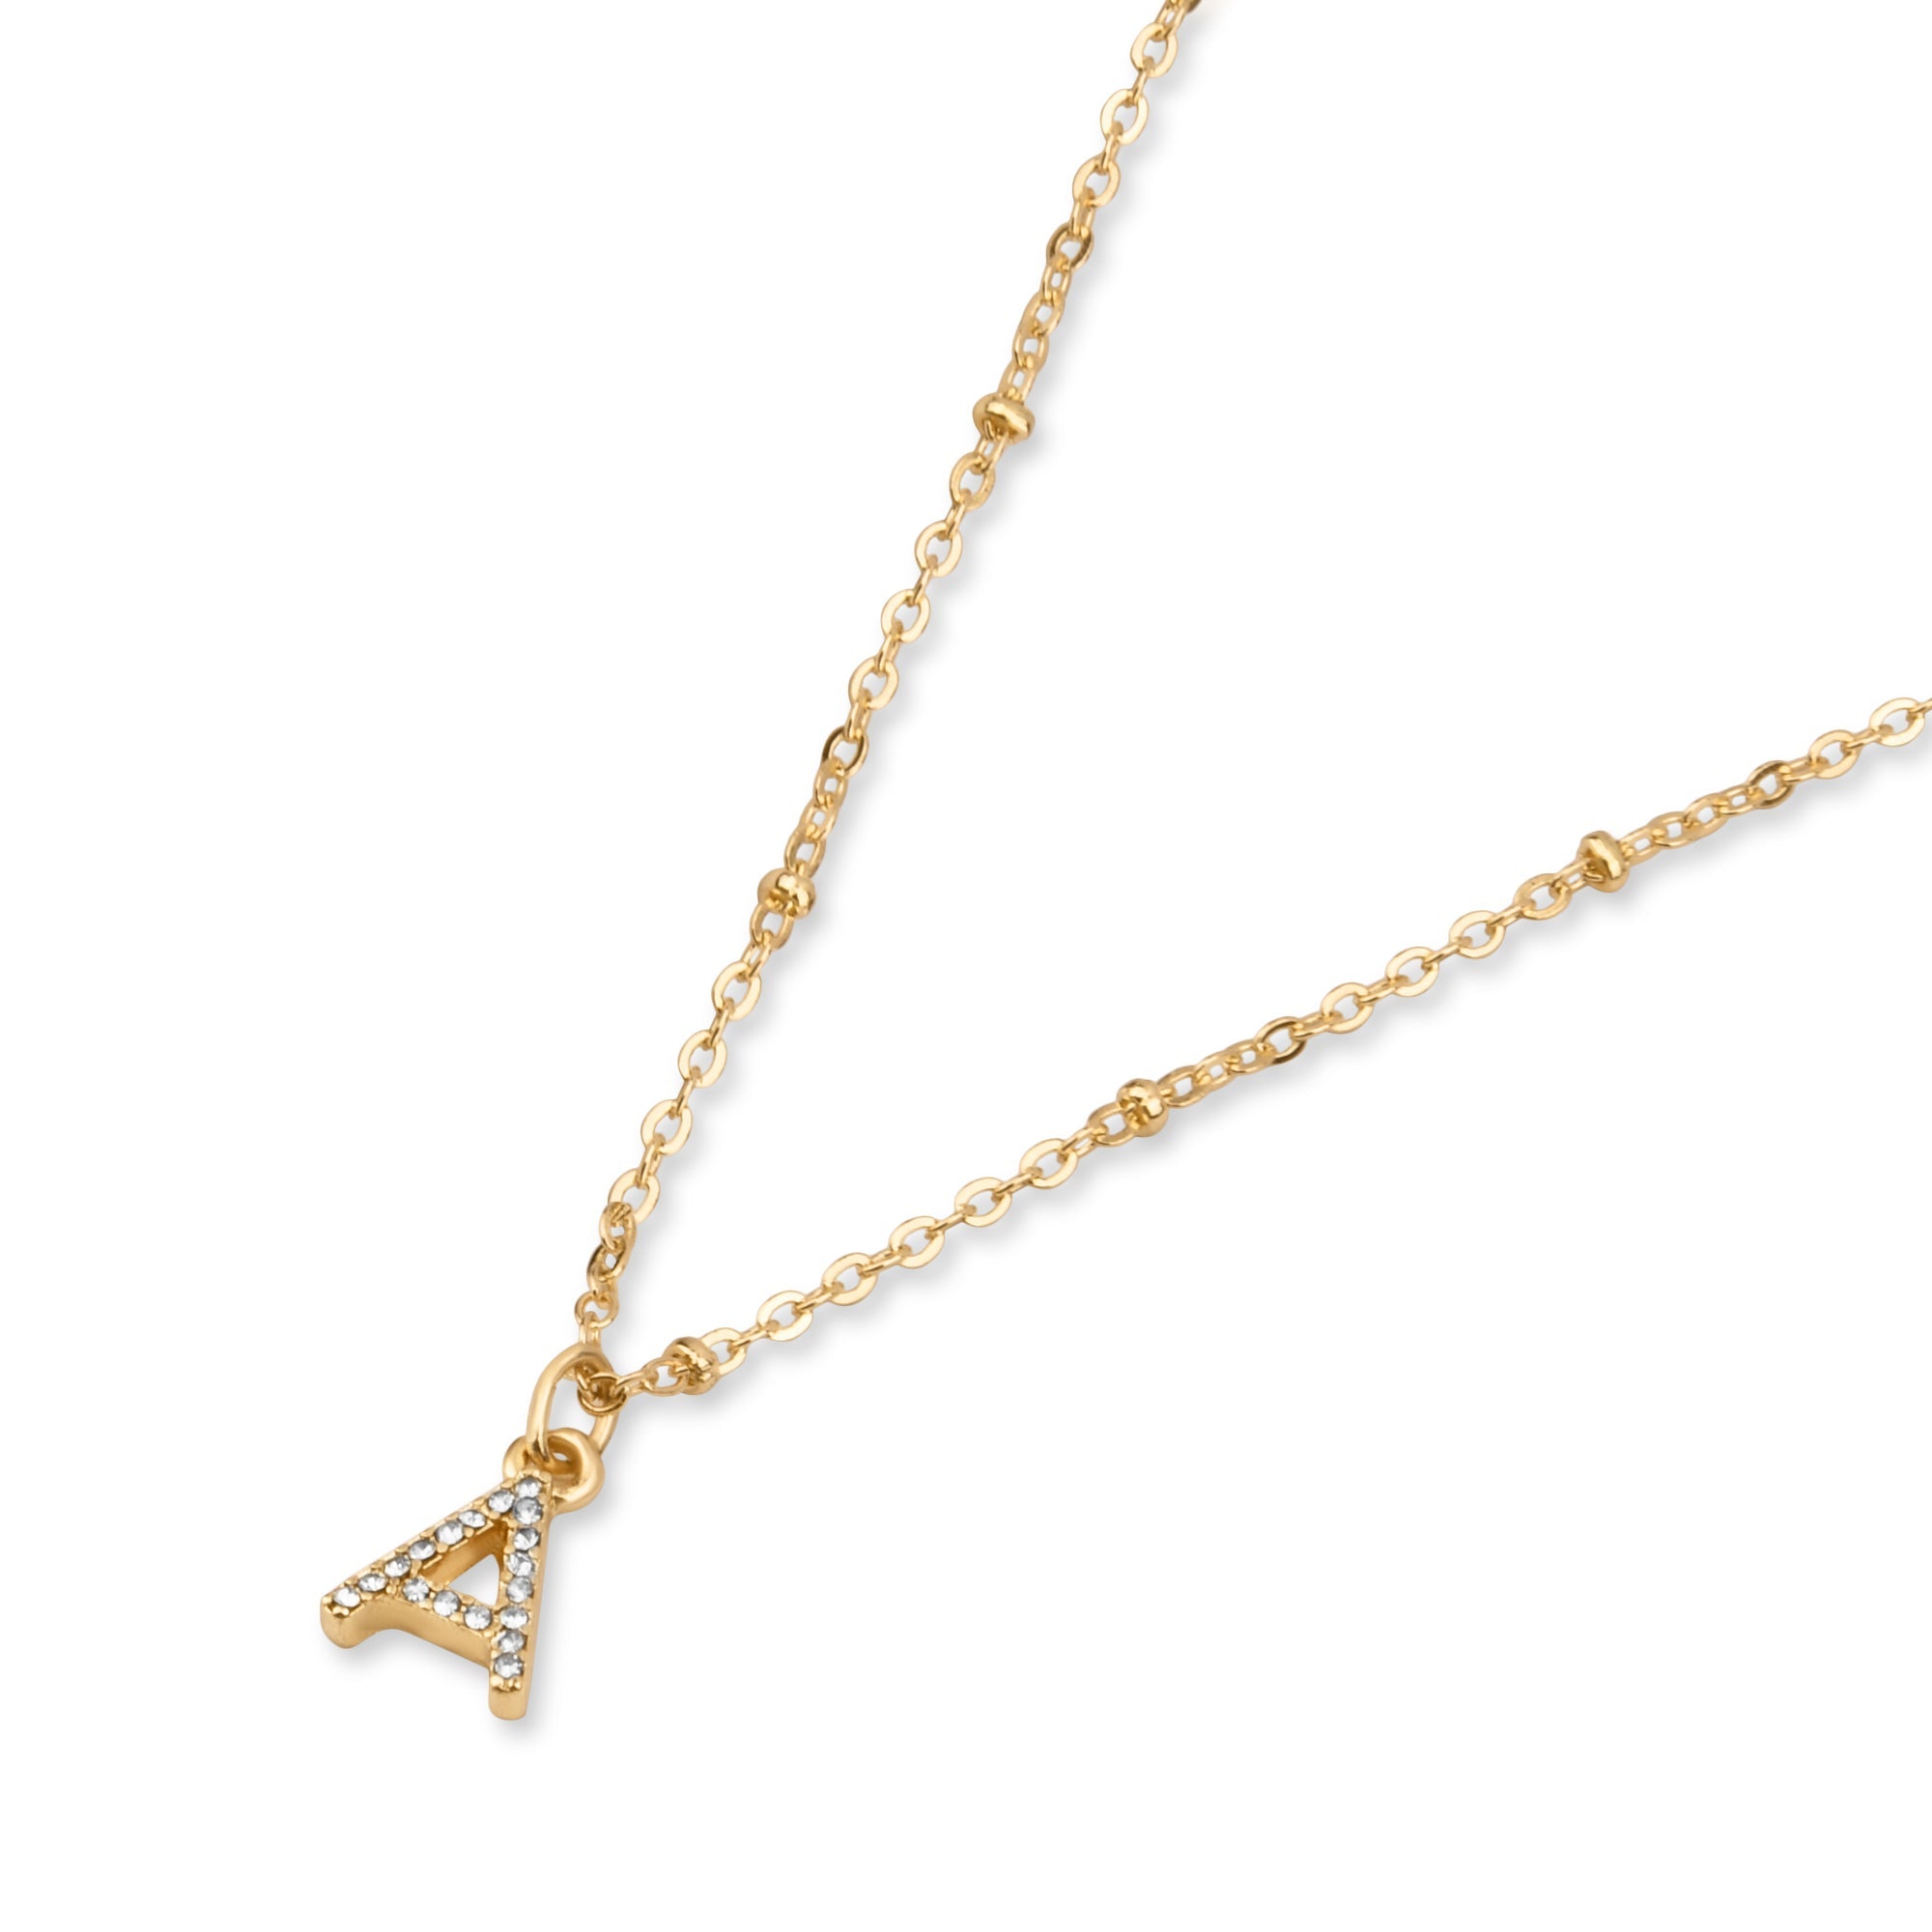 Accessorize 14Ct Gold-Plated Star Pearl Pendant Necklace | littlewoods.com